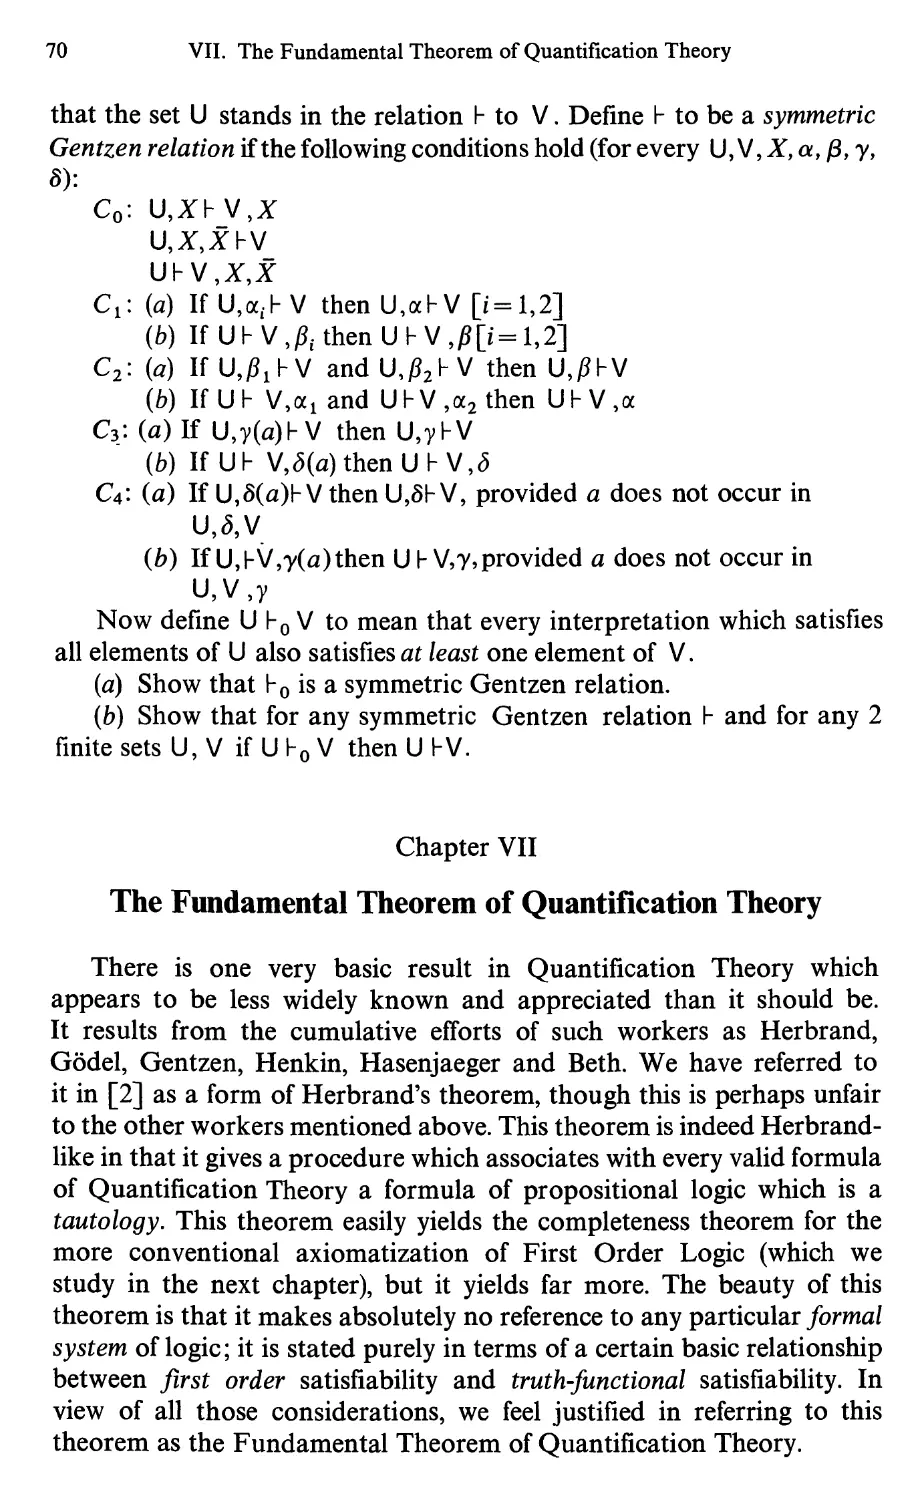 7 The Fundamental Theorem of Quantification Theory